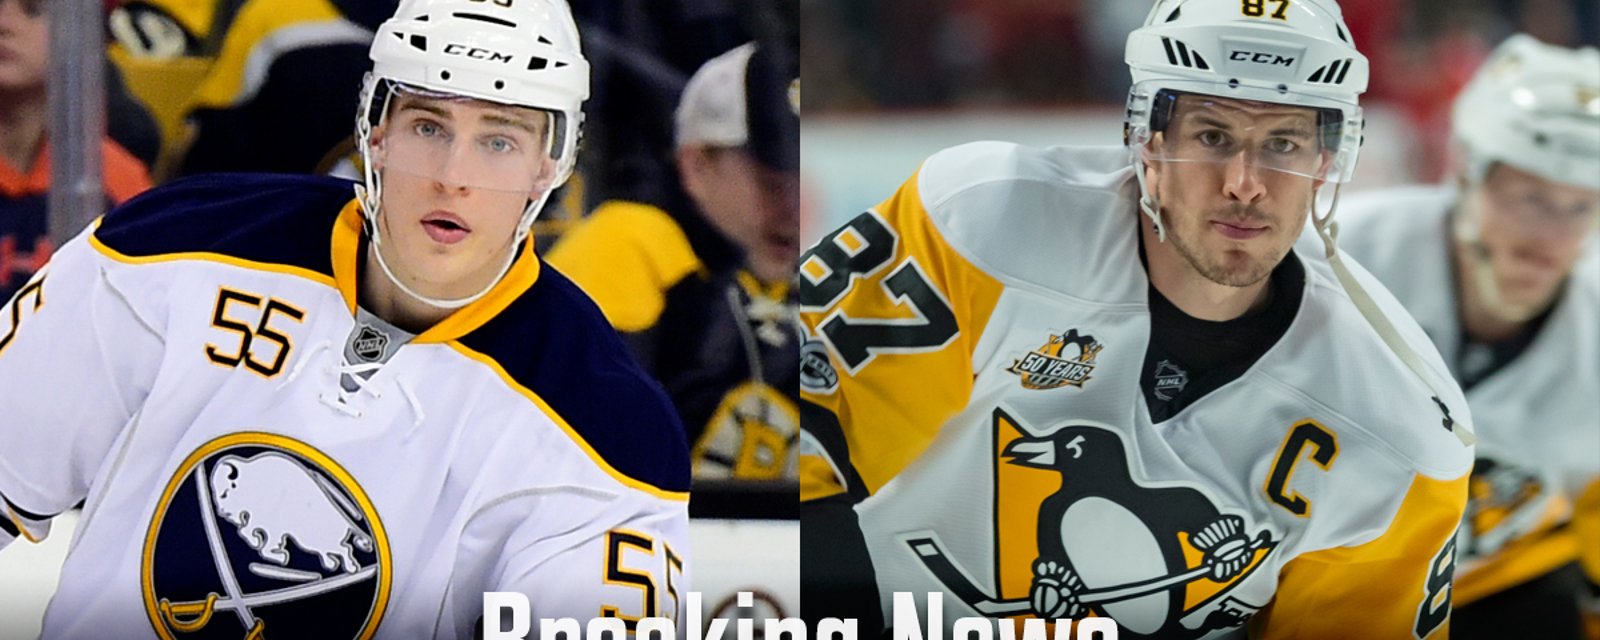 BREAKING: Player Will Have a Hearing Following DIRTY Pens-Sabres Game Last Night.